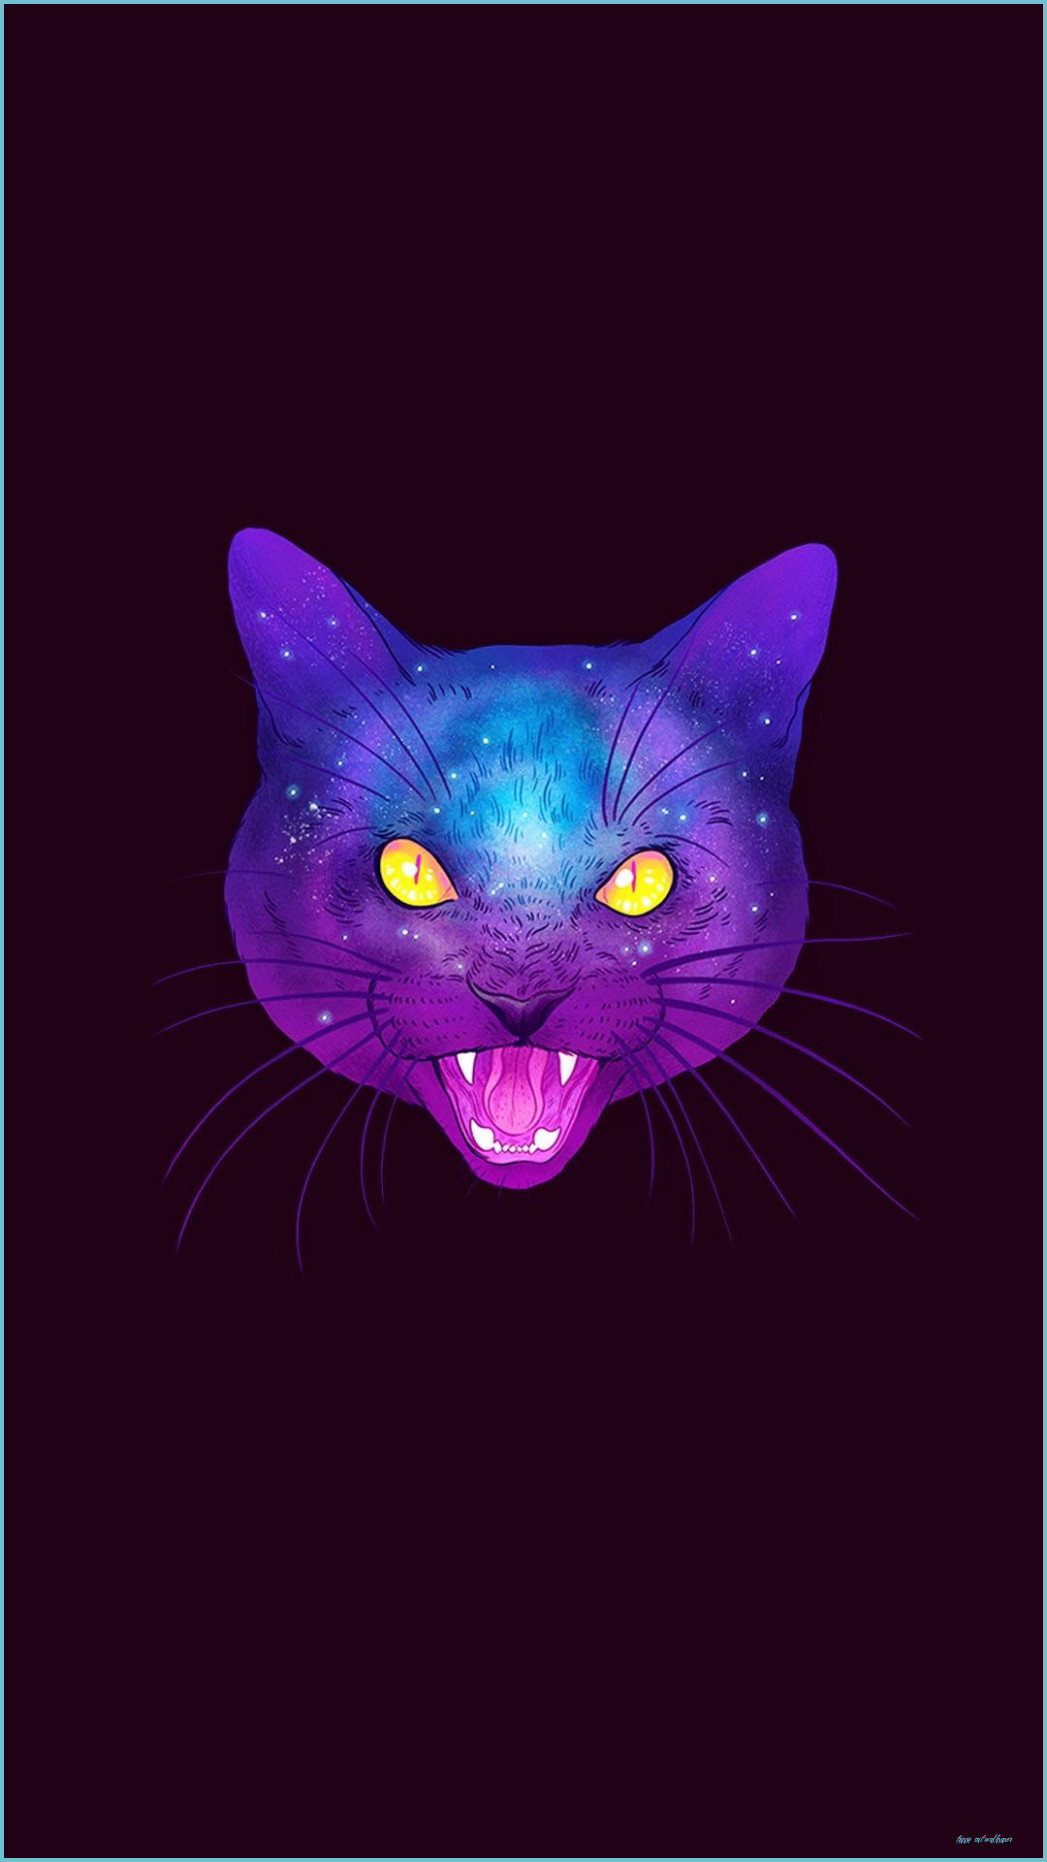 Trippy Cat Wallpapers - Wallpaper Cave